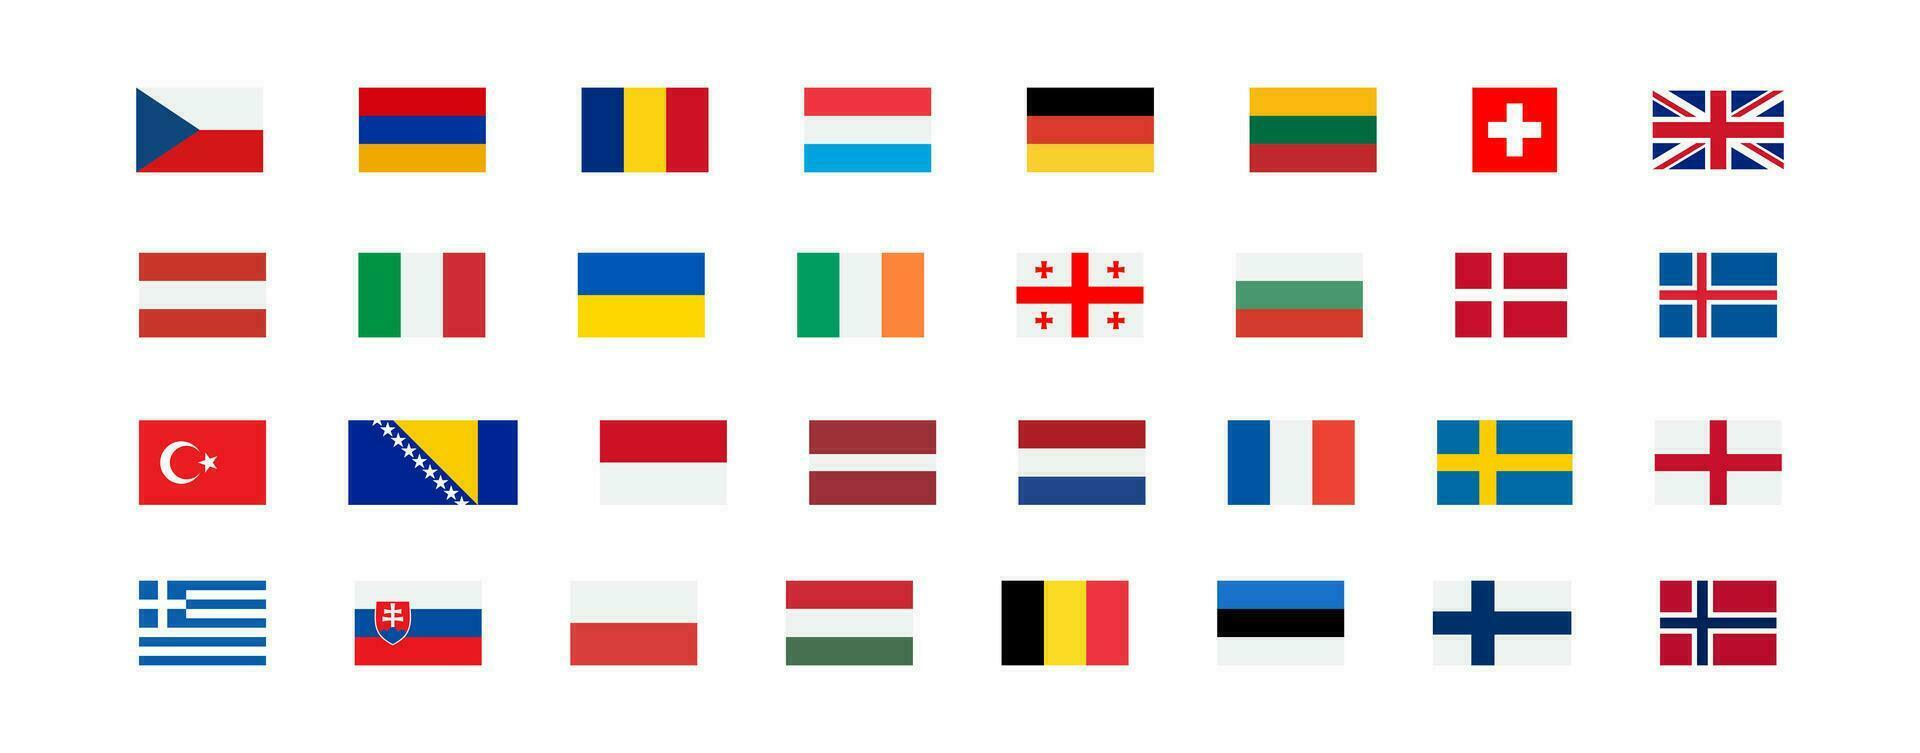 European flags icon. Europe countries set signs. Nation symbol. Banner of France, Germany, Austria, and other symbols. Square form icons. Vector isolated sign.